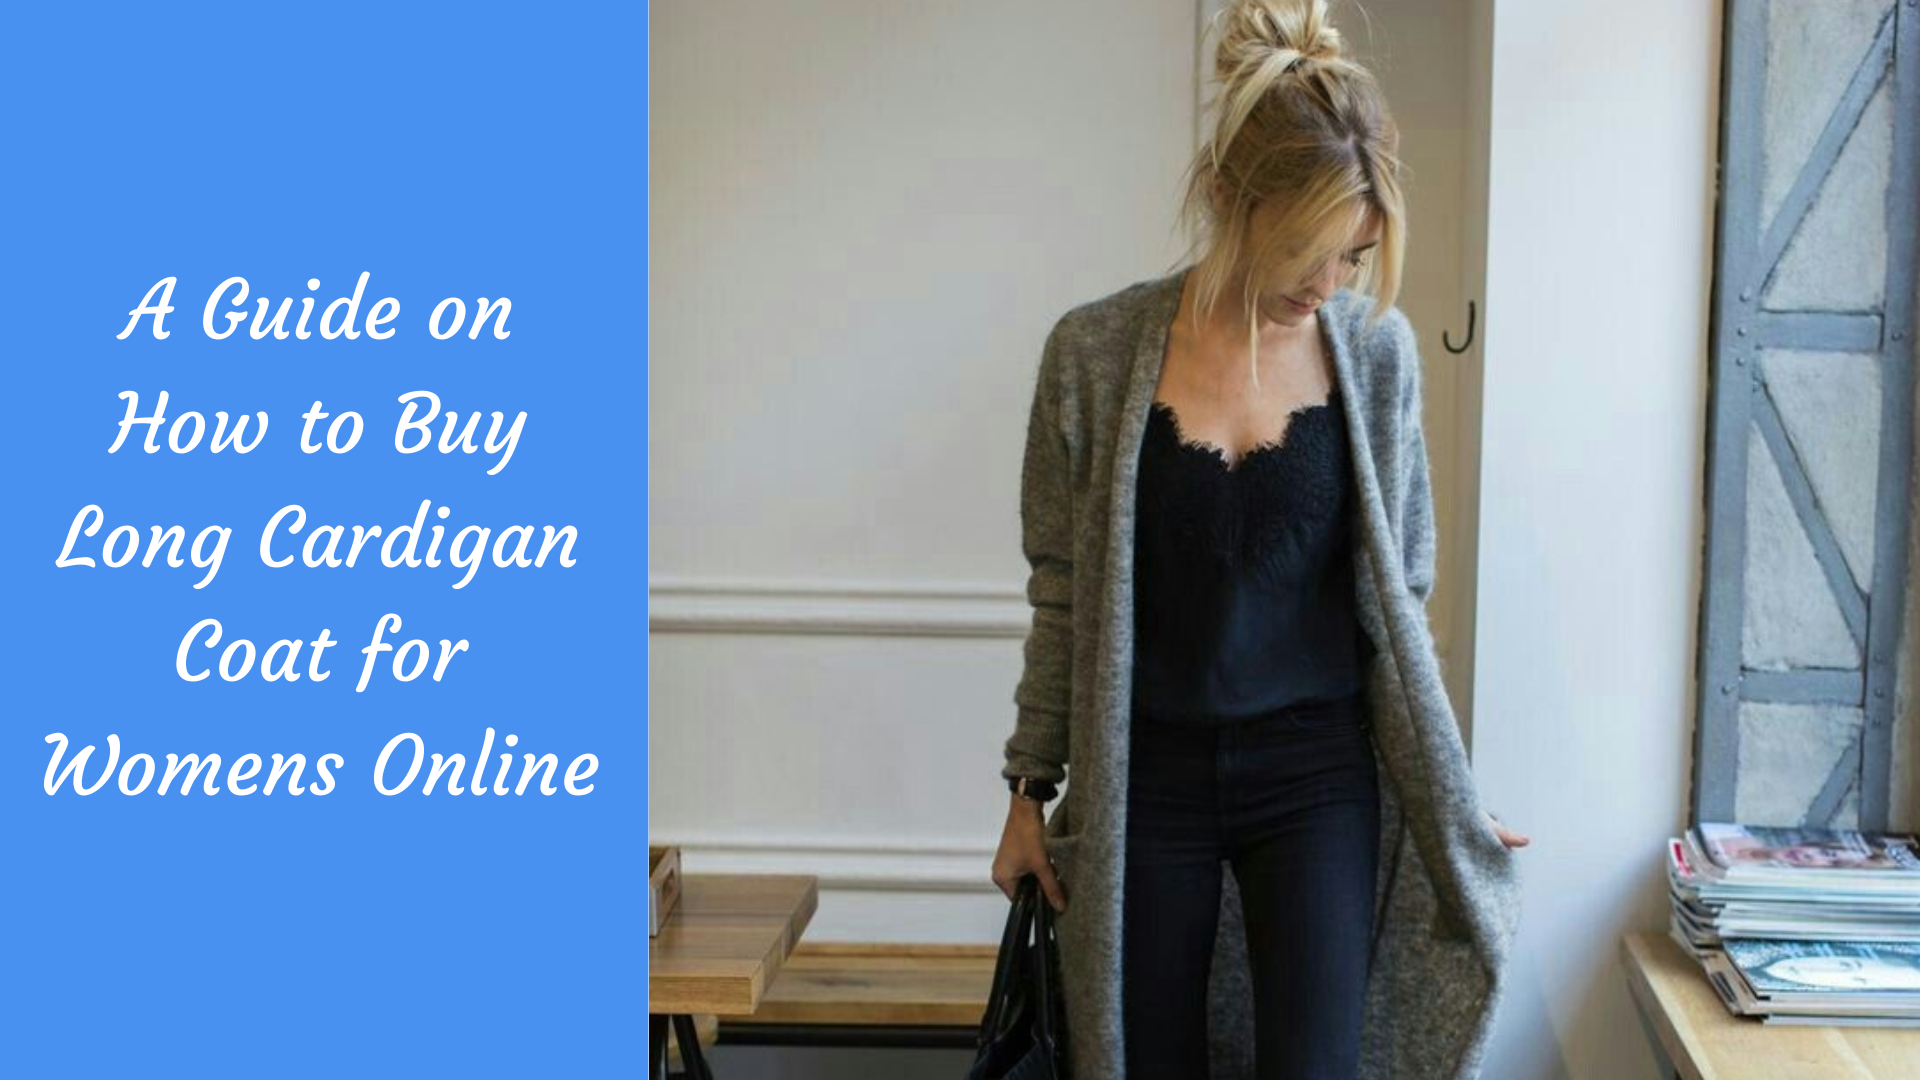 buy long cardigan coat for womens online article cover image